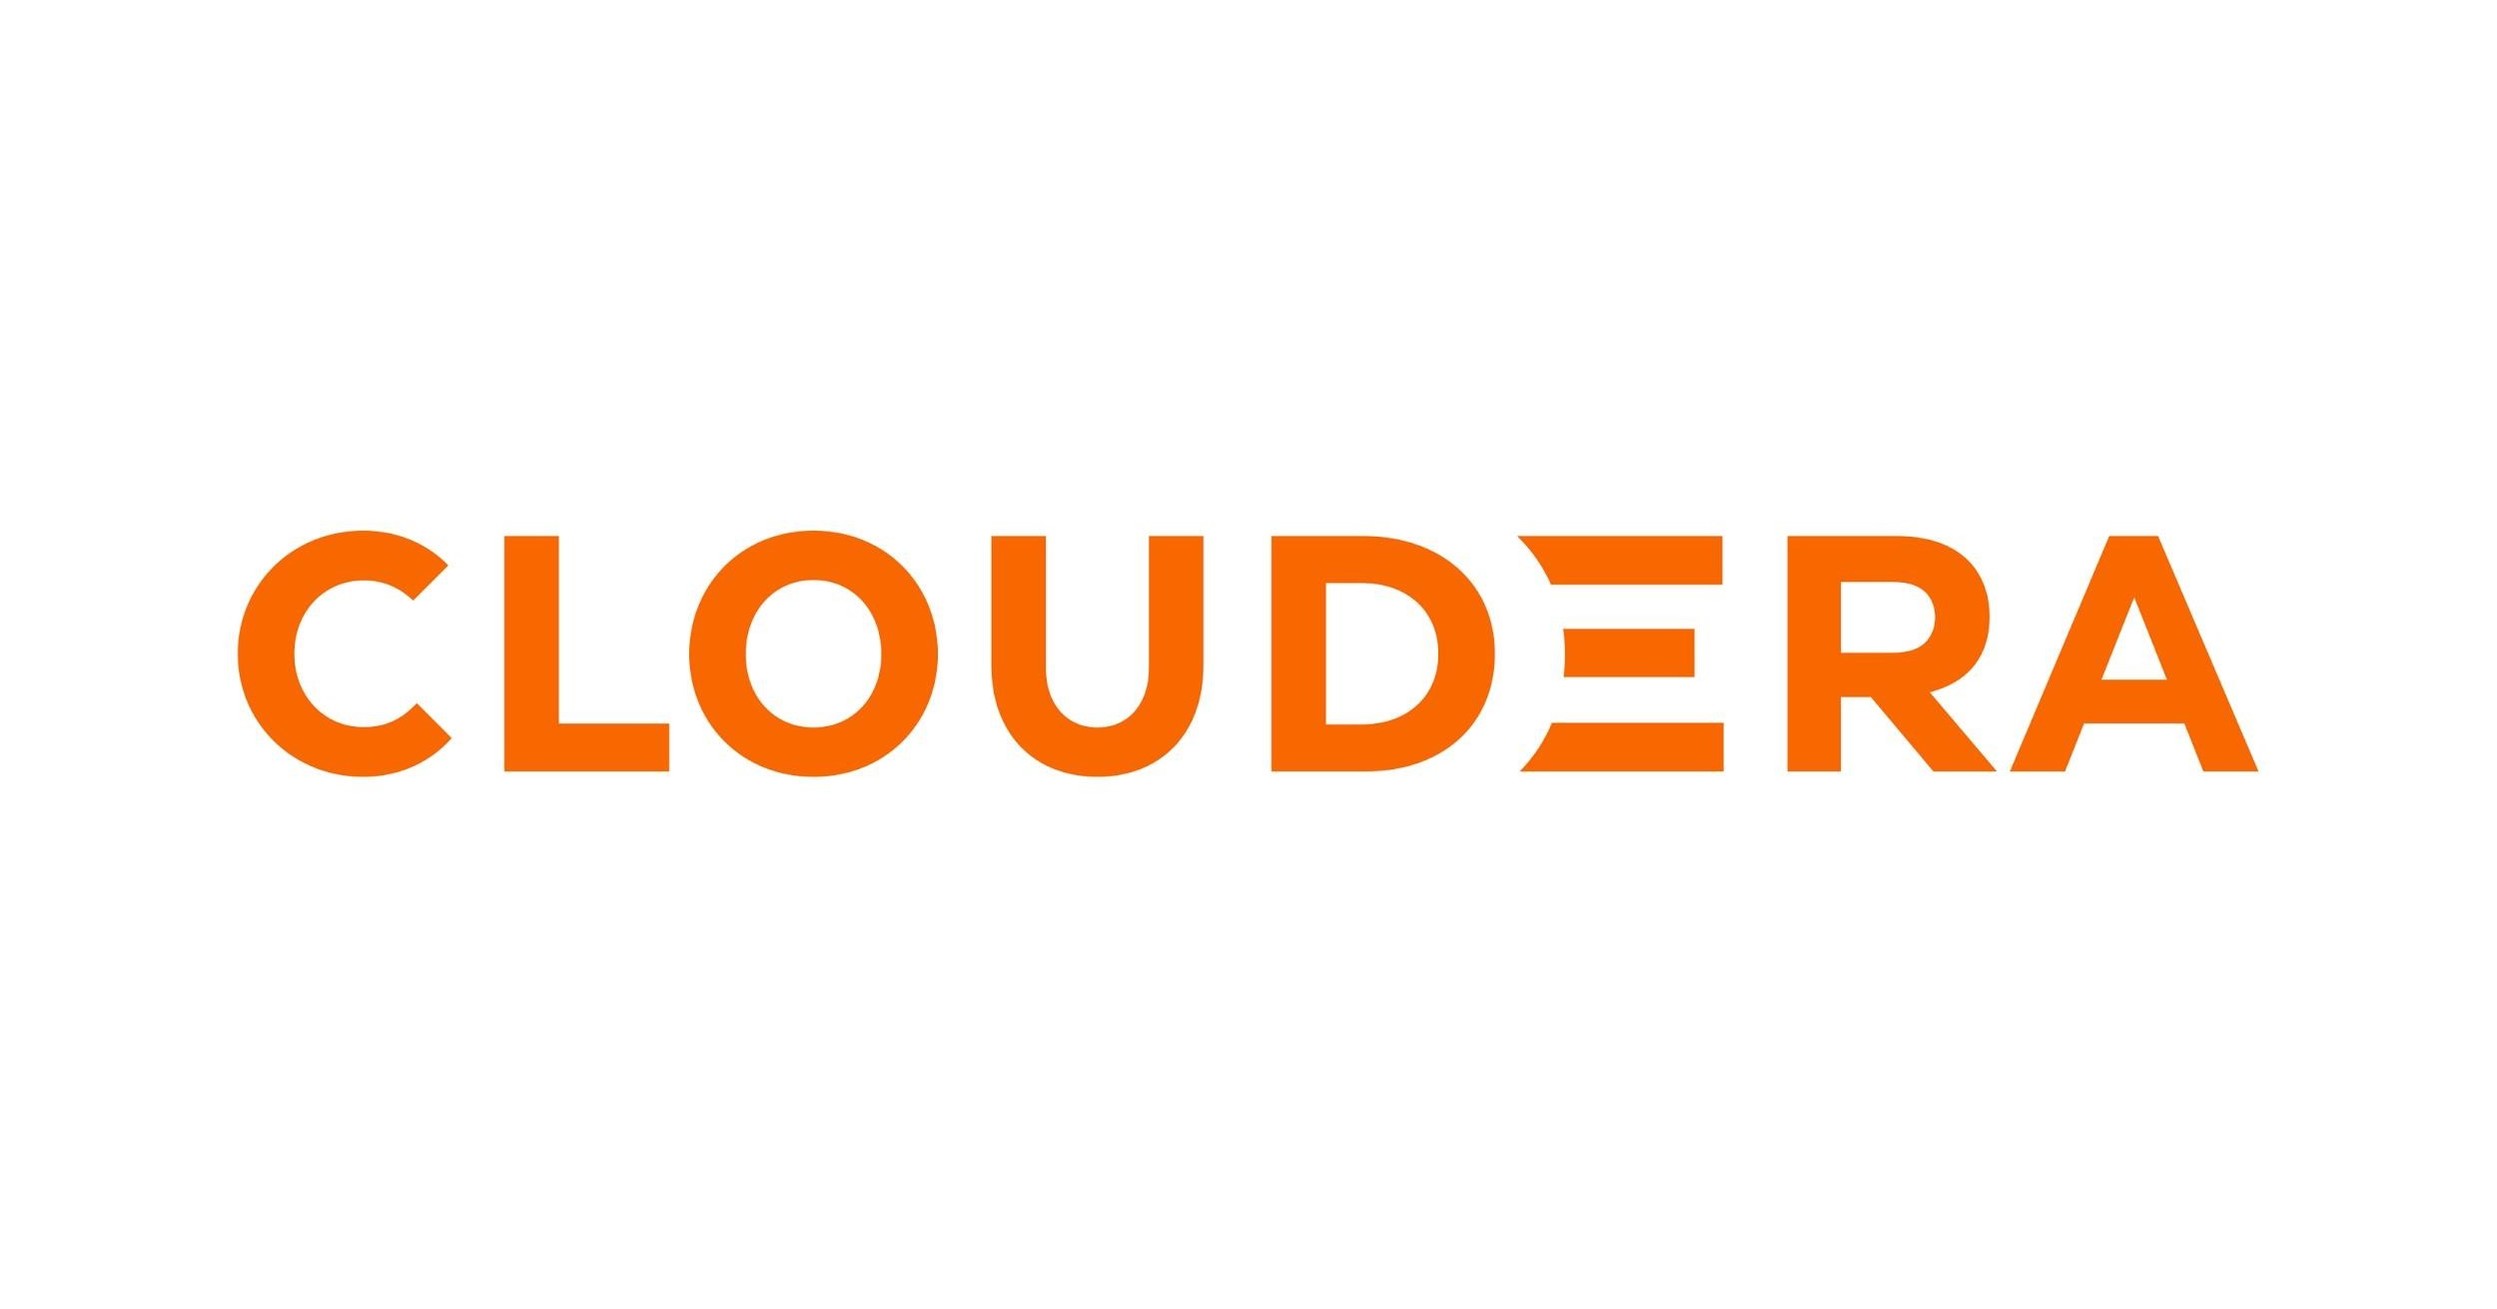 Cloudera Government Solutions to Showcase Trusted Data and AI Solutions at AWS Washington, D.C. Summit